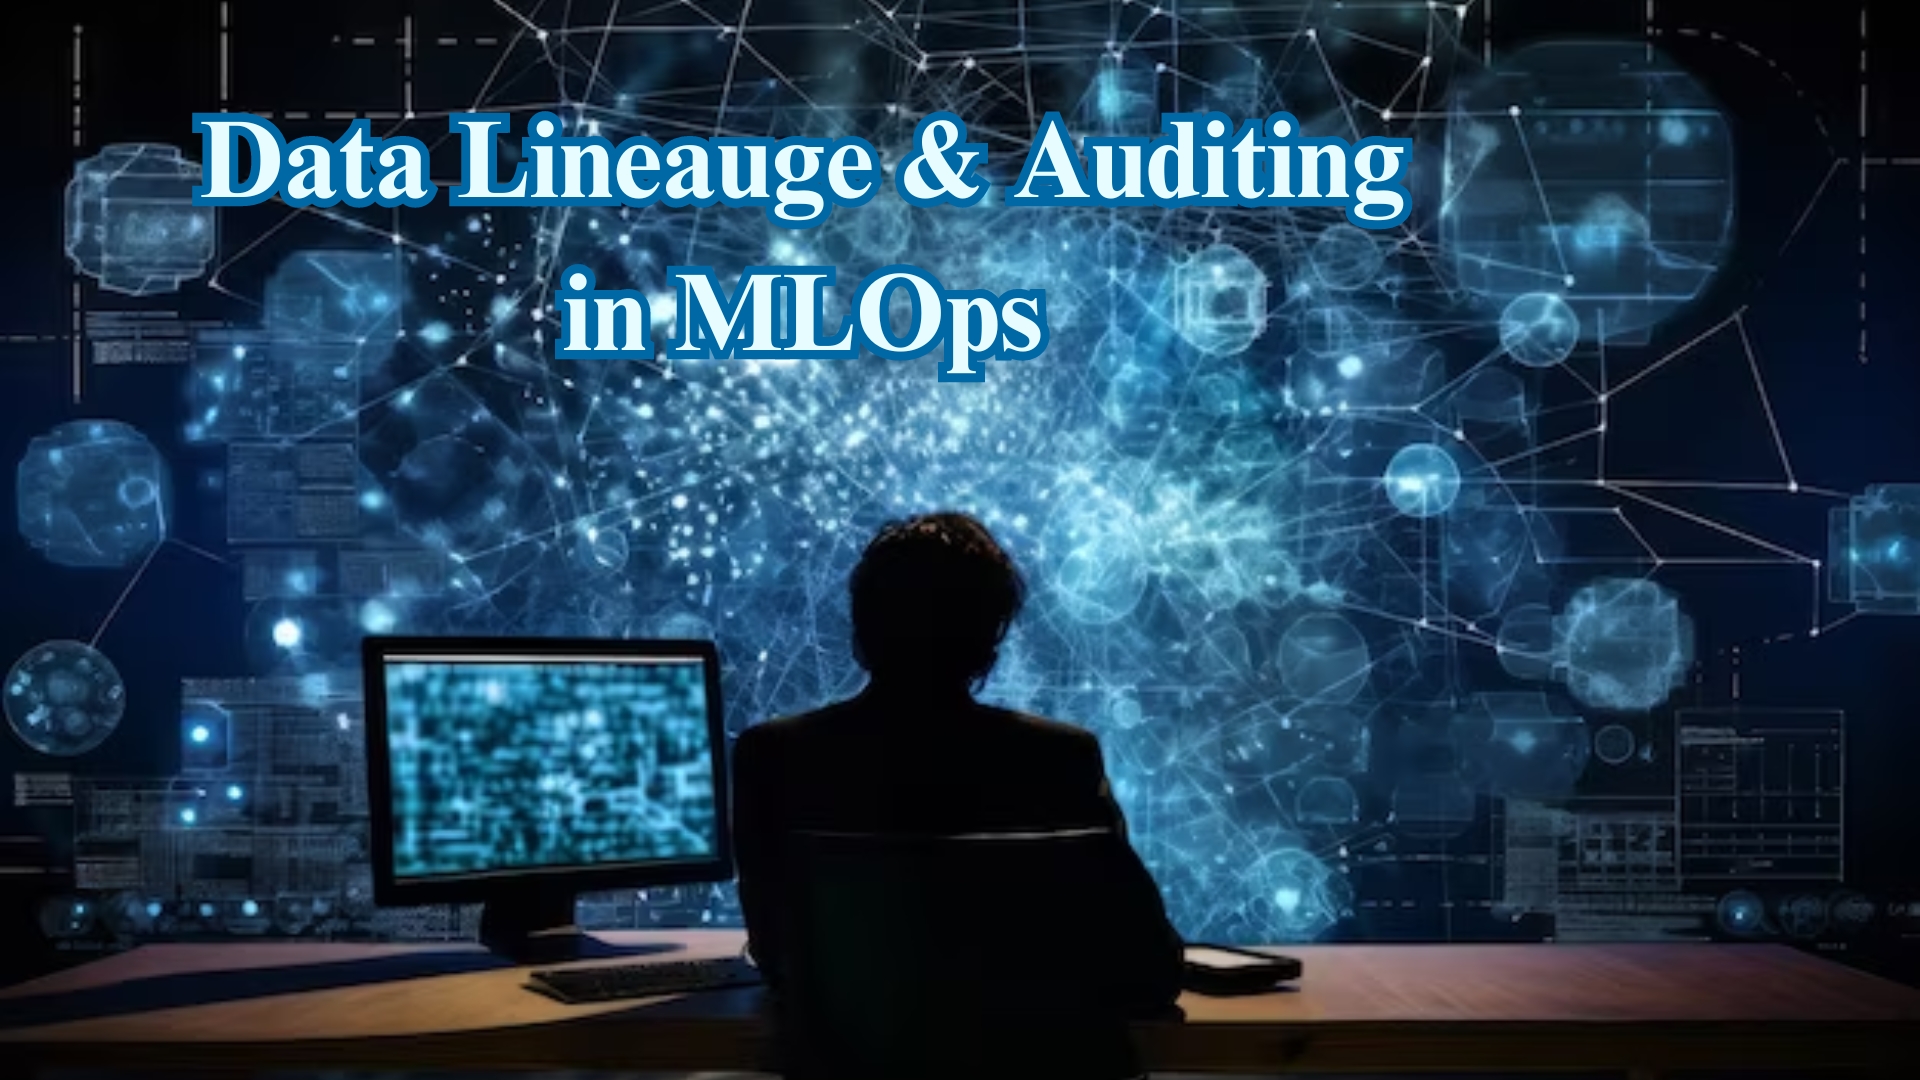 Data Lineauge & Auditing in MLOps